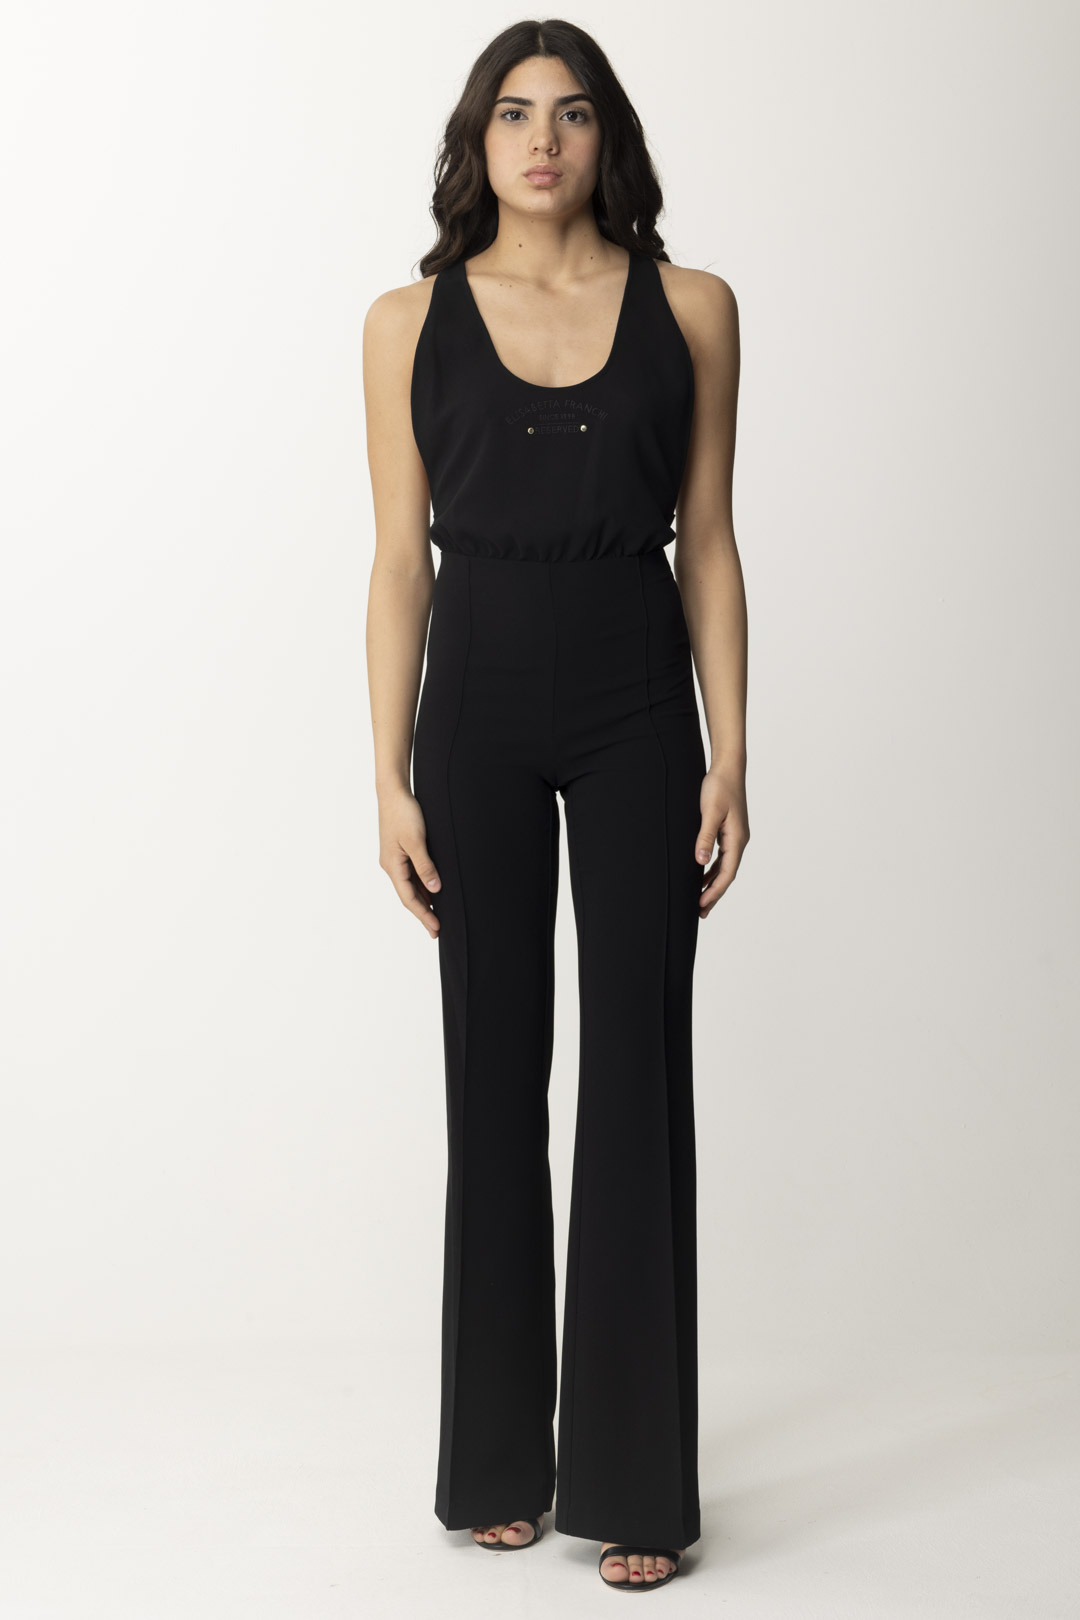 Preview: Elisabetta Franchi Reserved Logo Embroidered Jumpsuit Nero